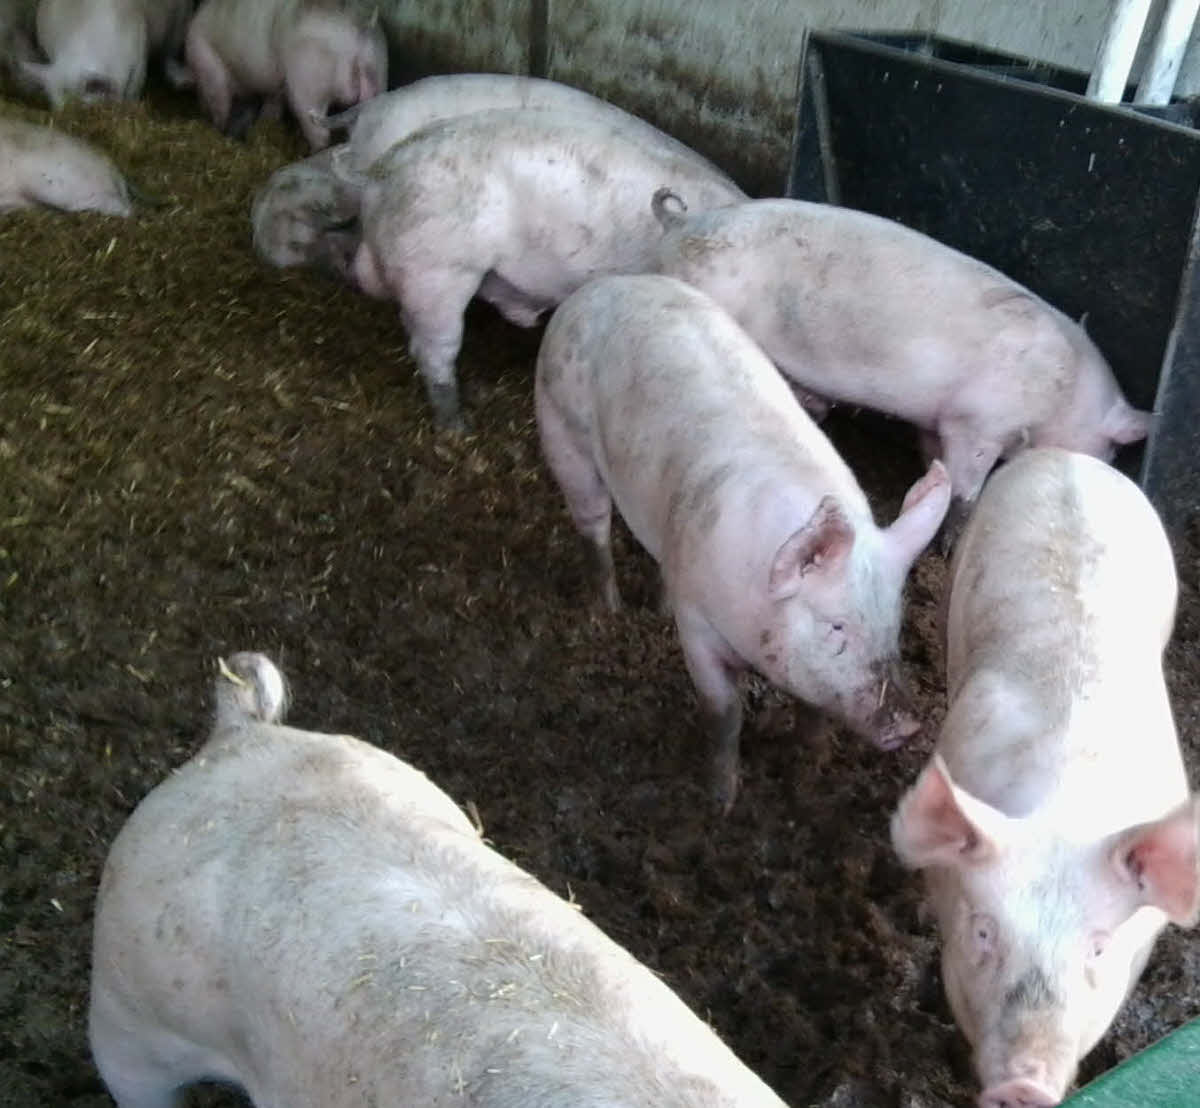 Smelly pigs in the mud. How and why to stop complaining.